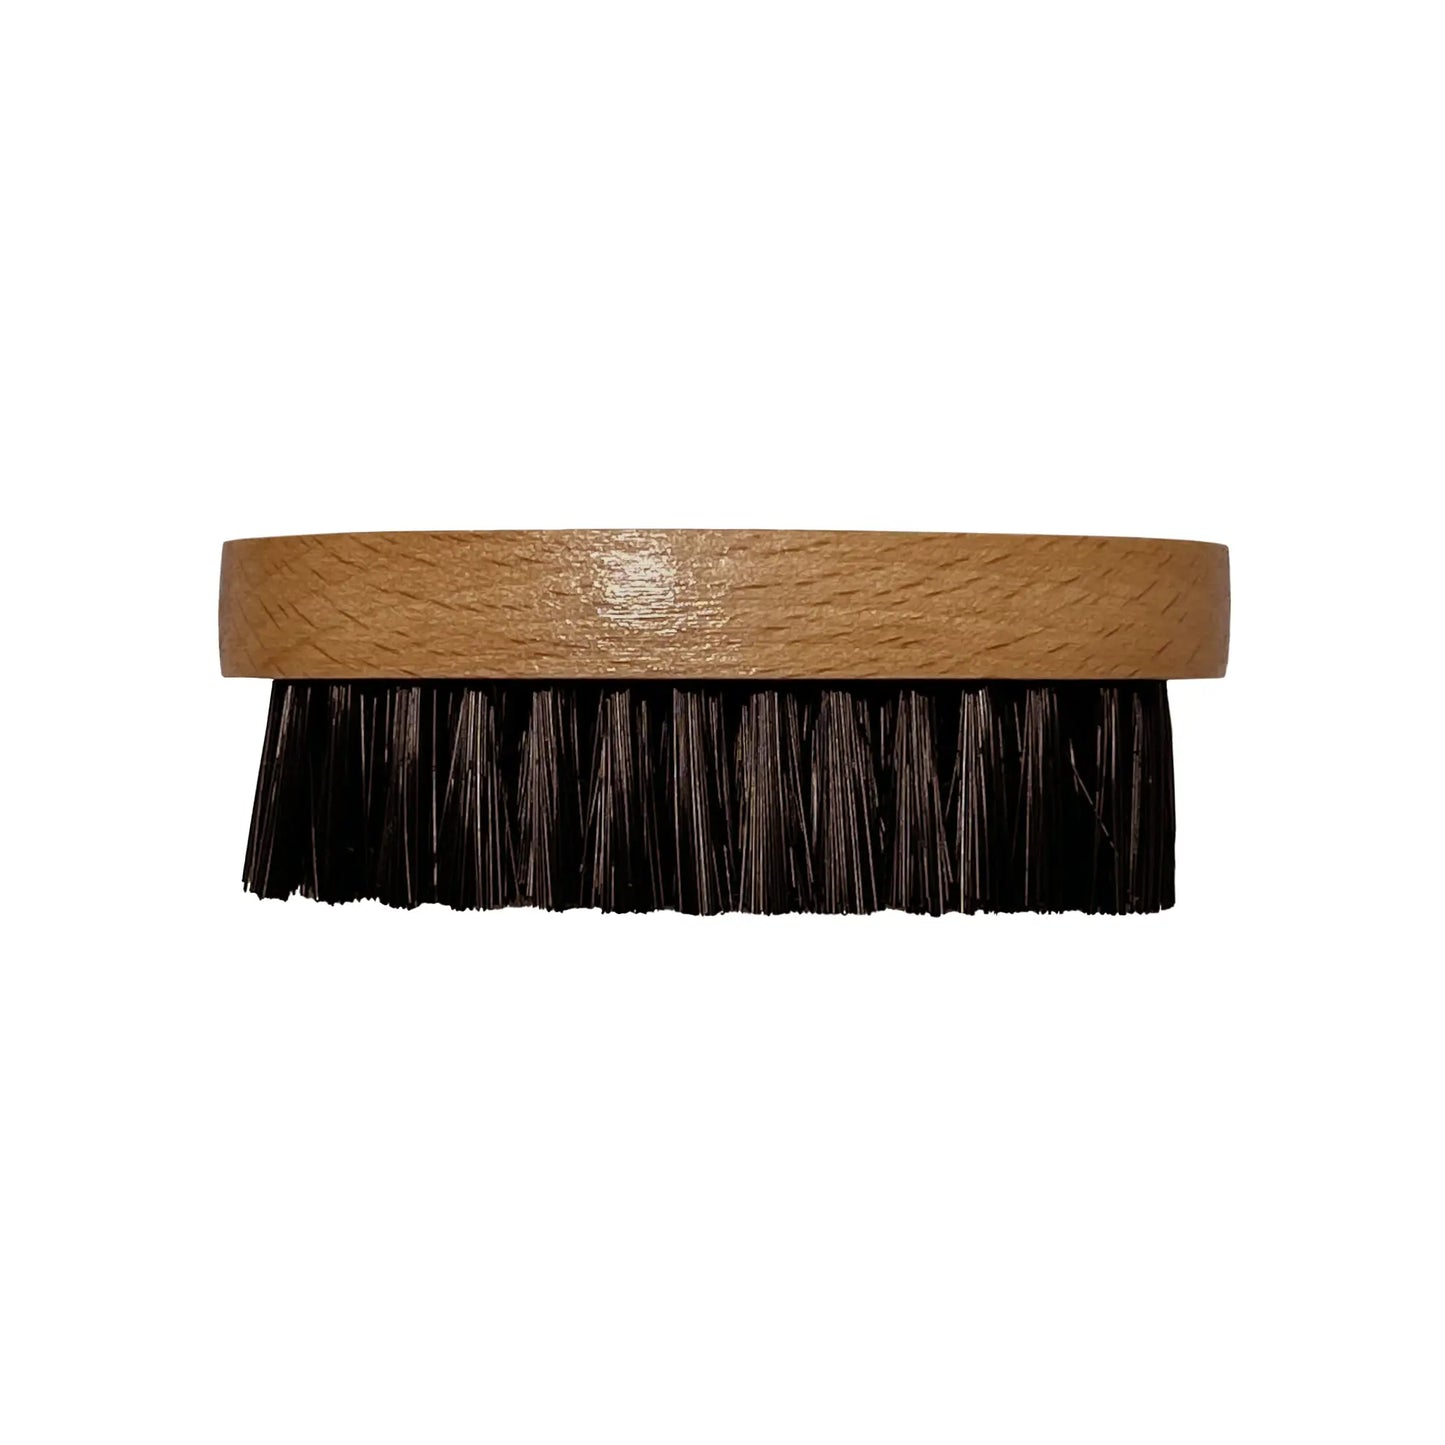 A black brush with a wooden handle, designed for beard grooming.